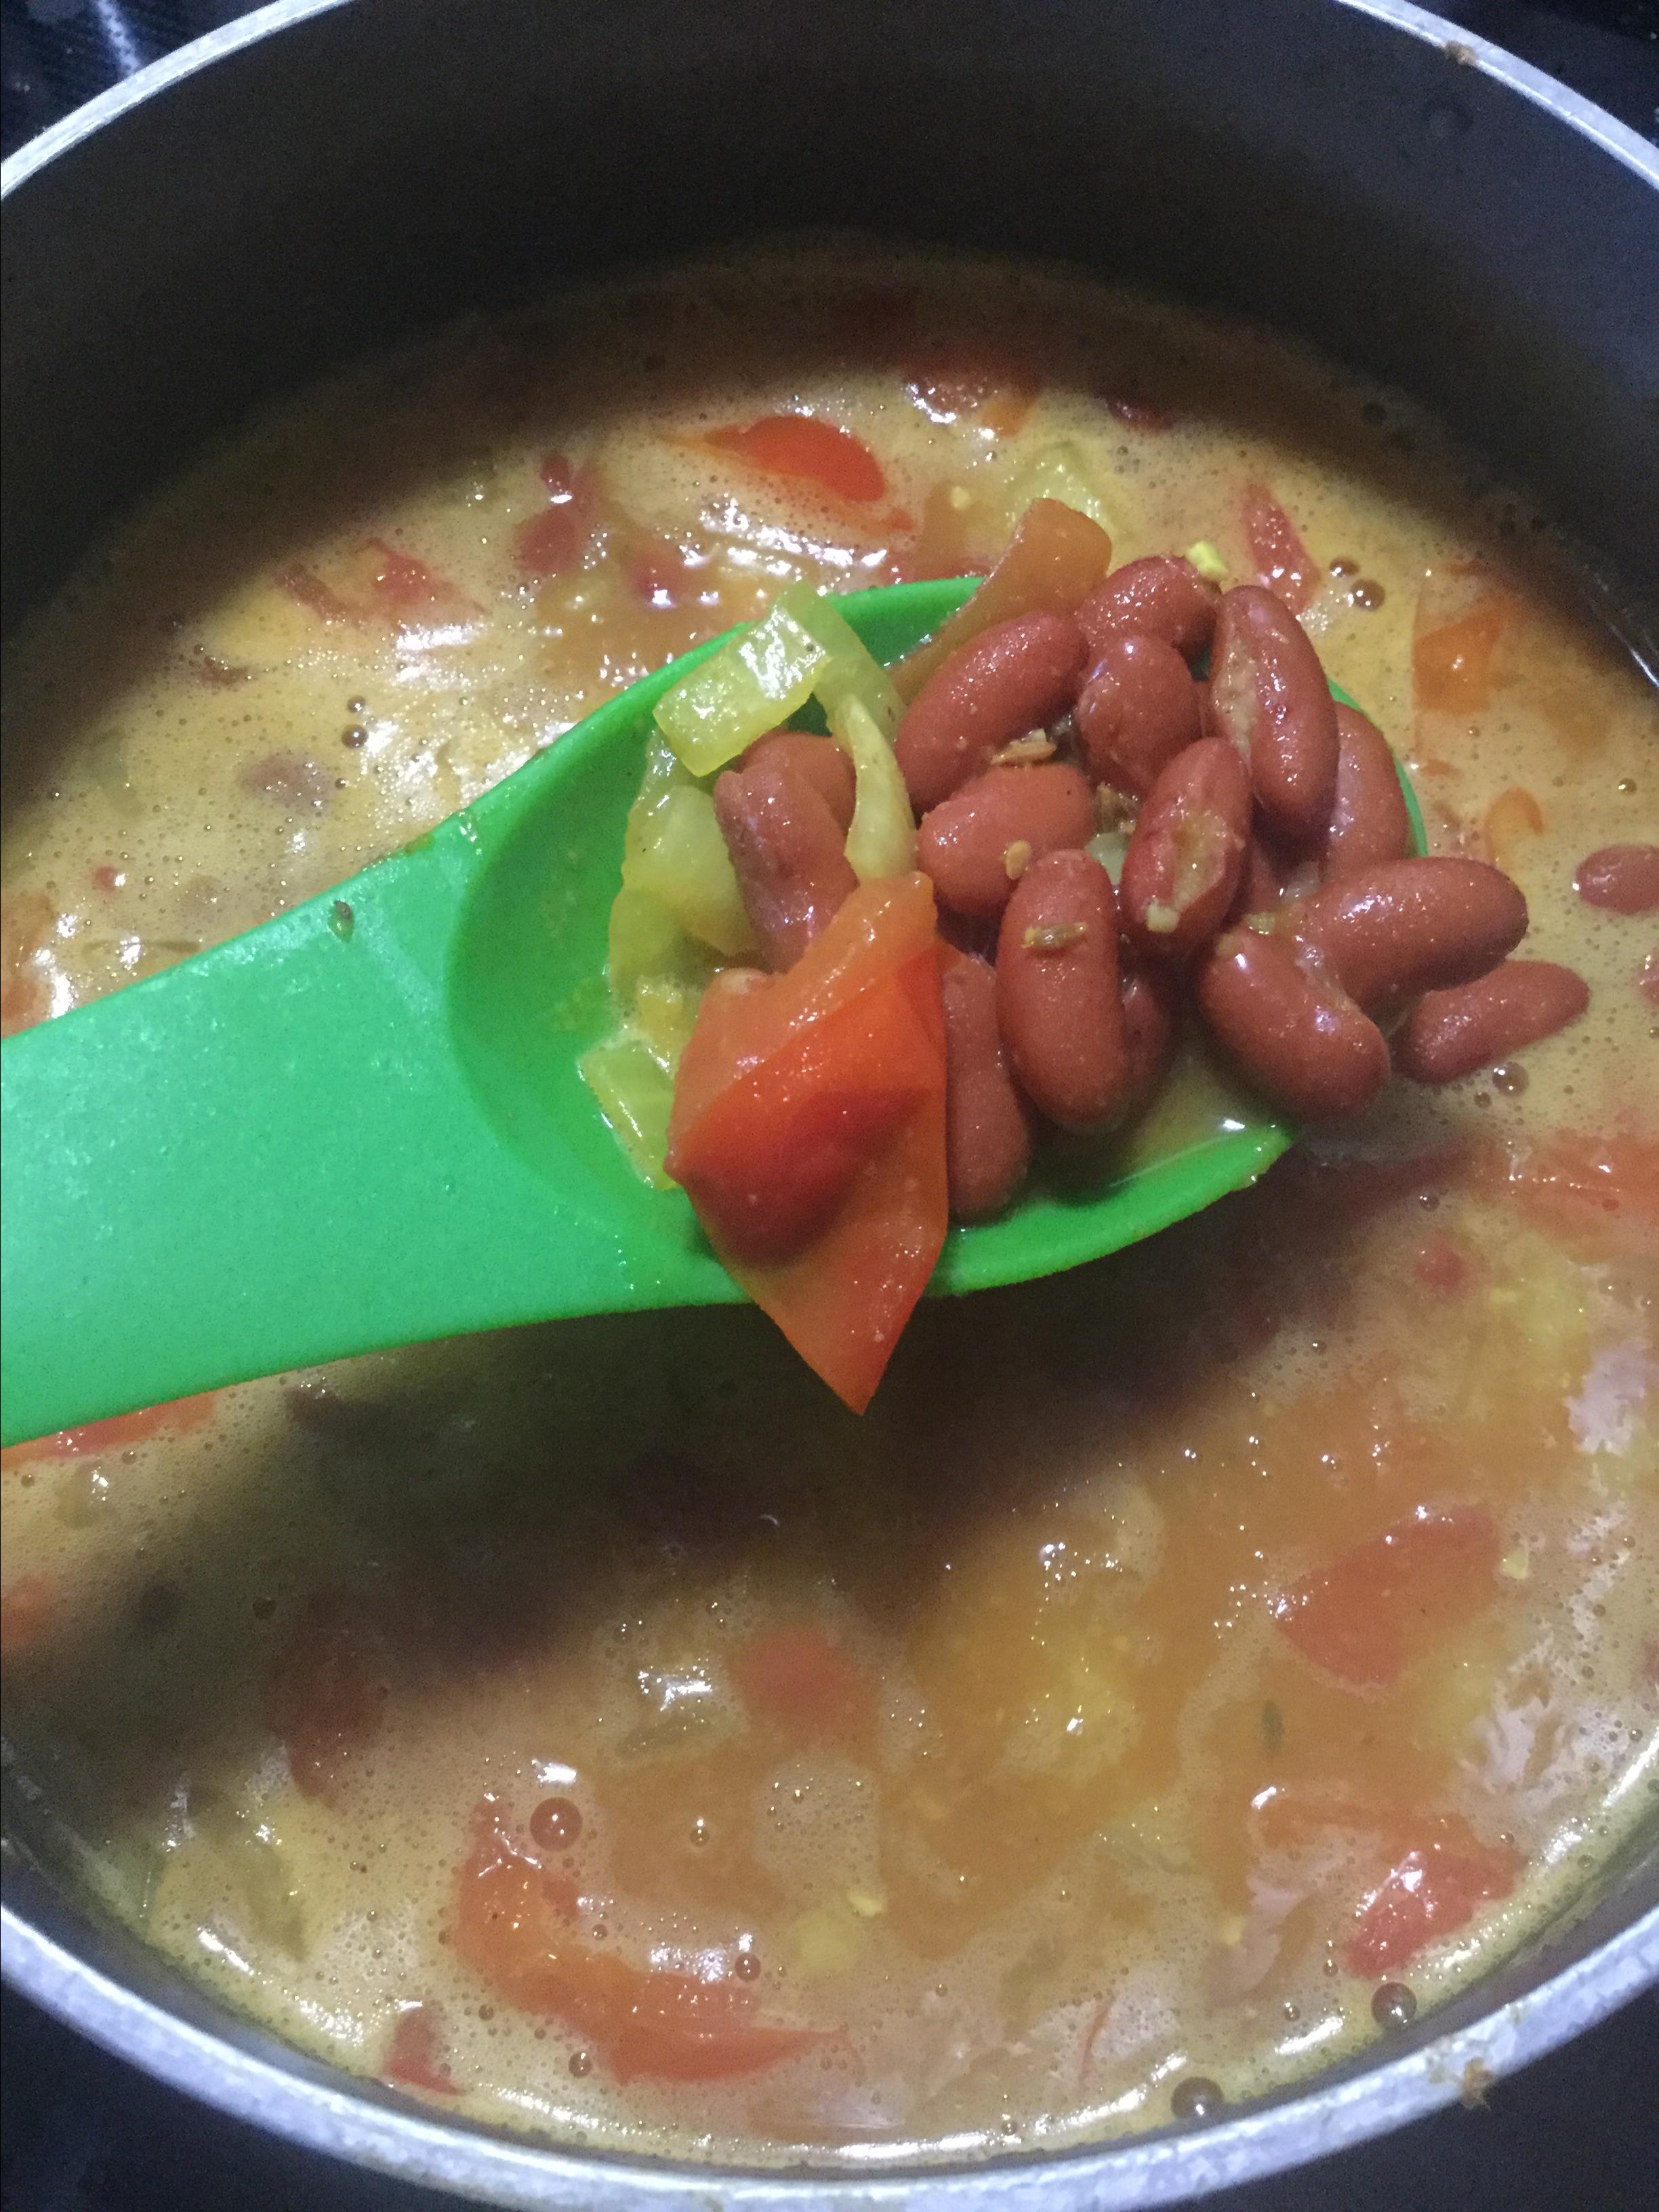 <p>"Rajma is comfort food at its best," says SUSMITA. "I like rajma best with simple jeera (cumin) rice. Of course, some roti would be great too. When I was in college, I ate rajma at least once a week. Cheap, nutritious, and comforting. What is not to like?"</p>
                          